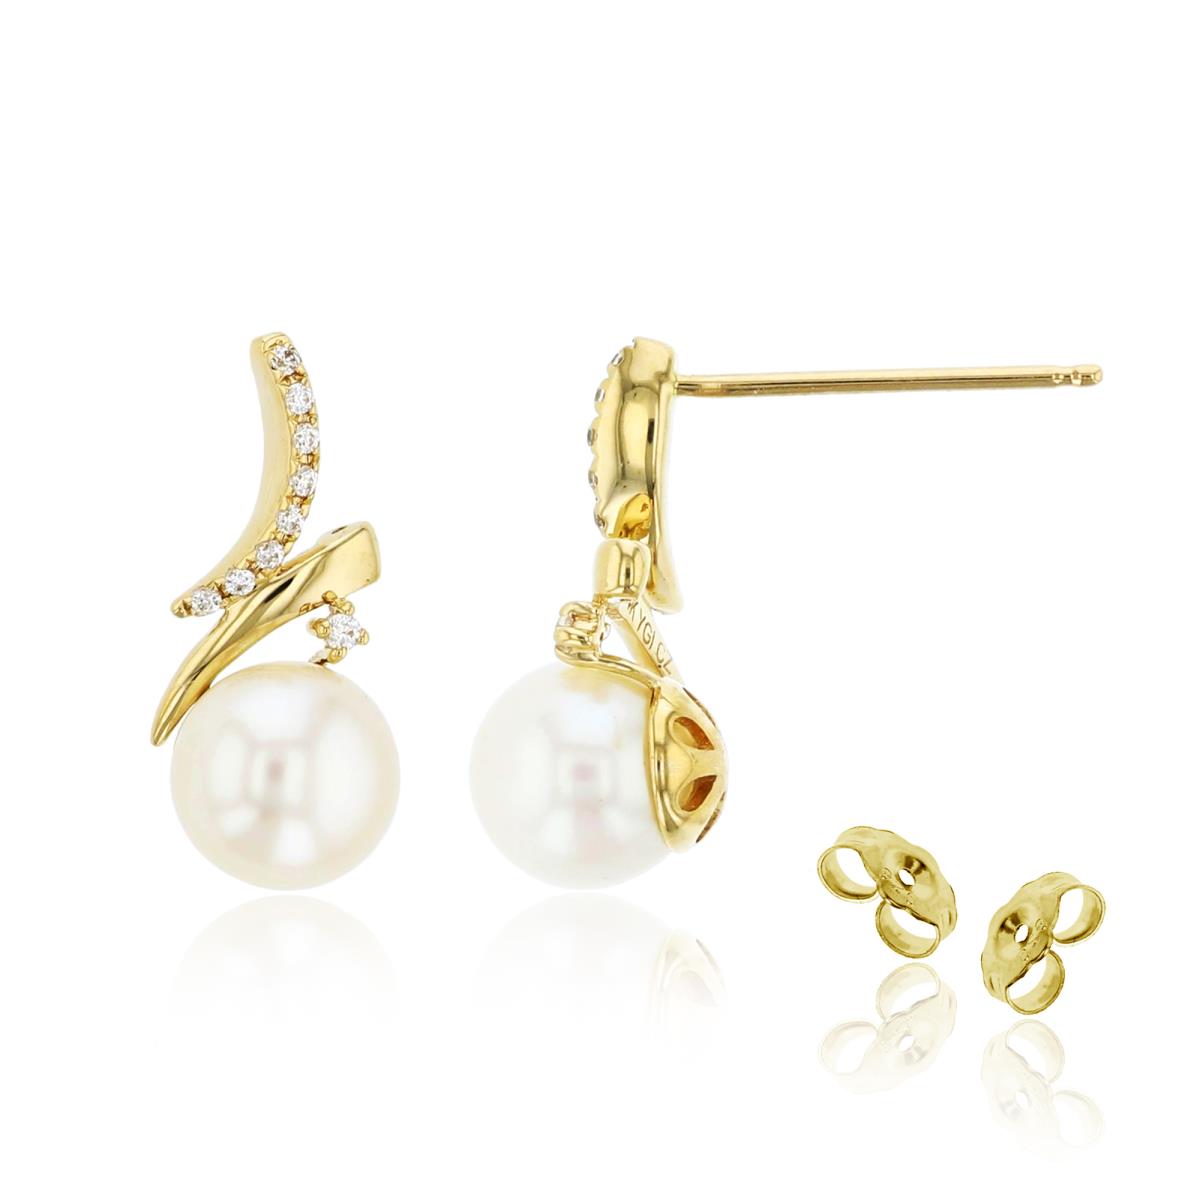 ESTIMATED-10K Yellow Gold 0.04 CTTW Rnd Diamonds & 6mm Rnd White Pearl Earring with Clutch